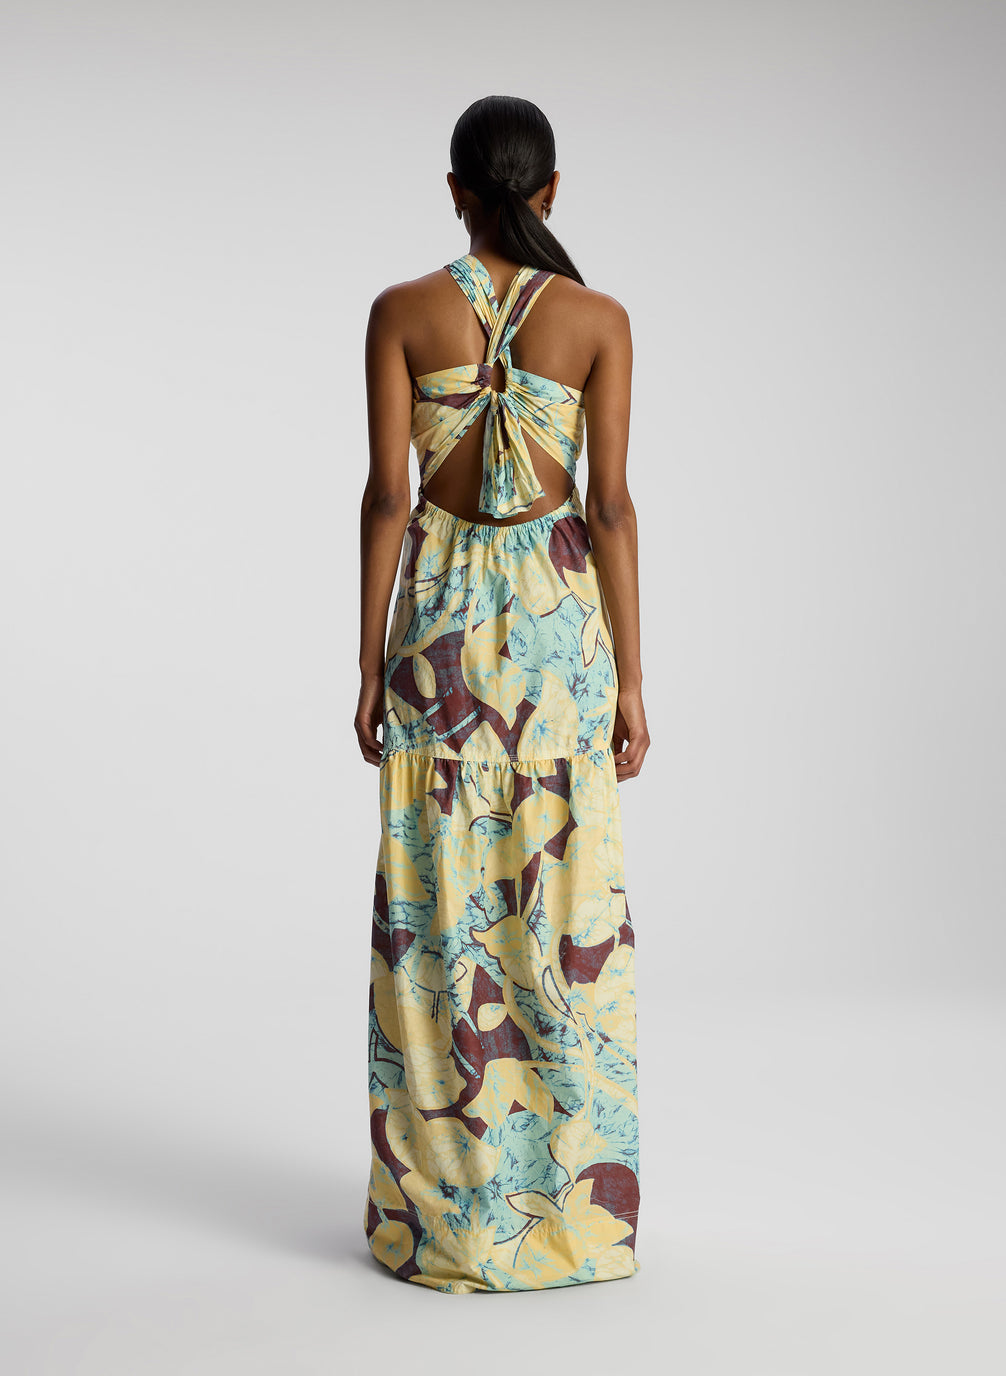 back view of woman wearing printed maxi dress